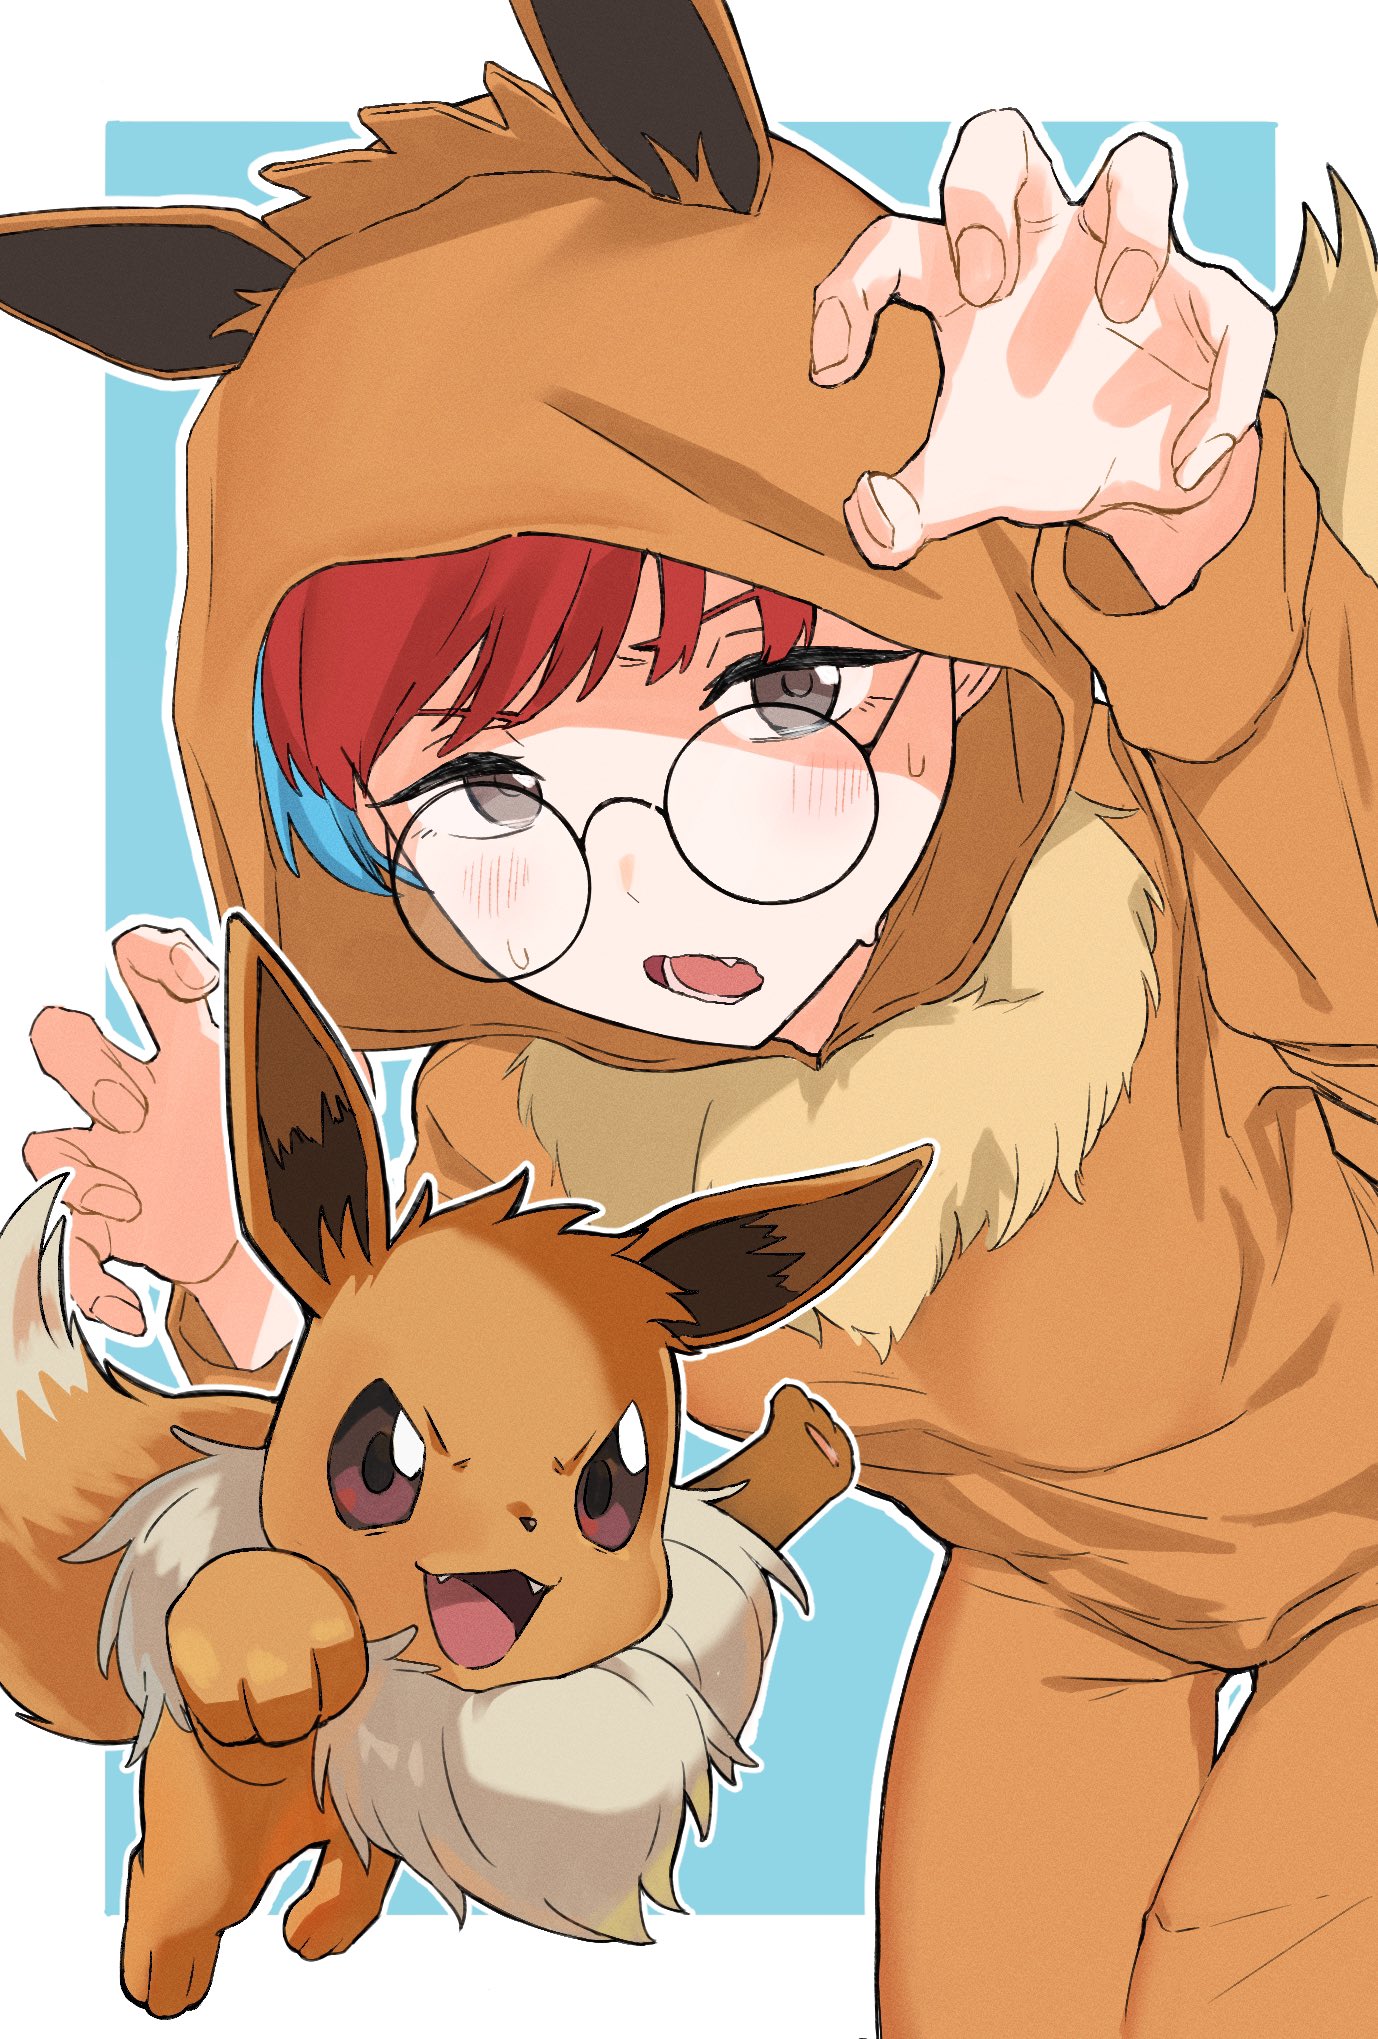 eevee, penny, and poke kid (pokemon and 1 more) drawn by